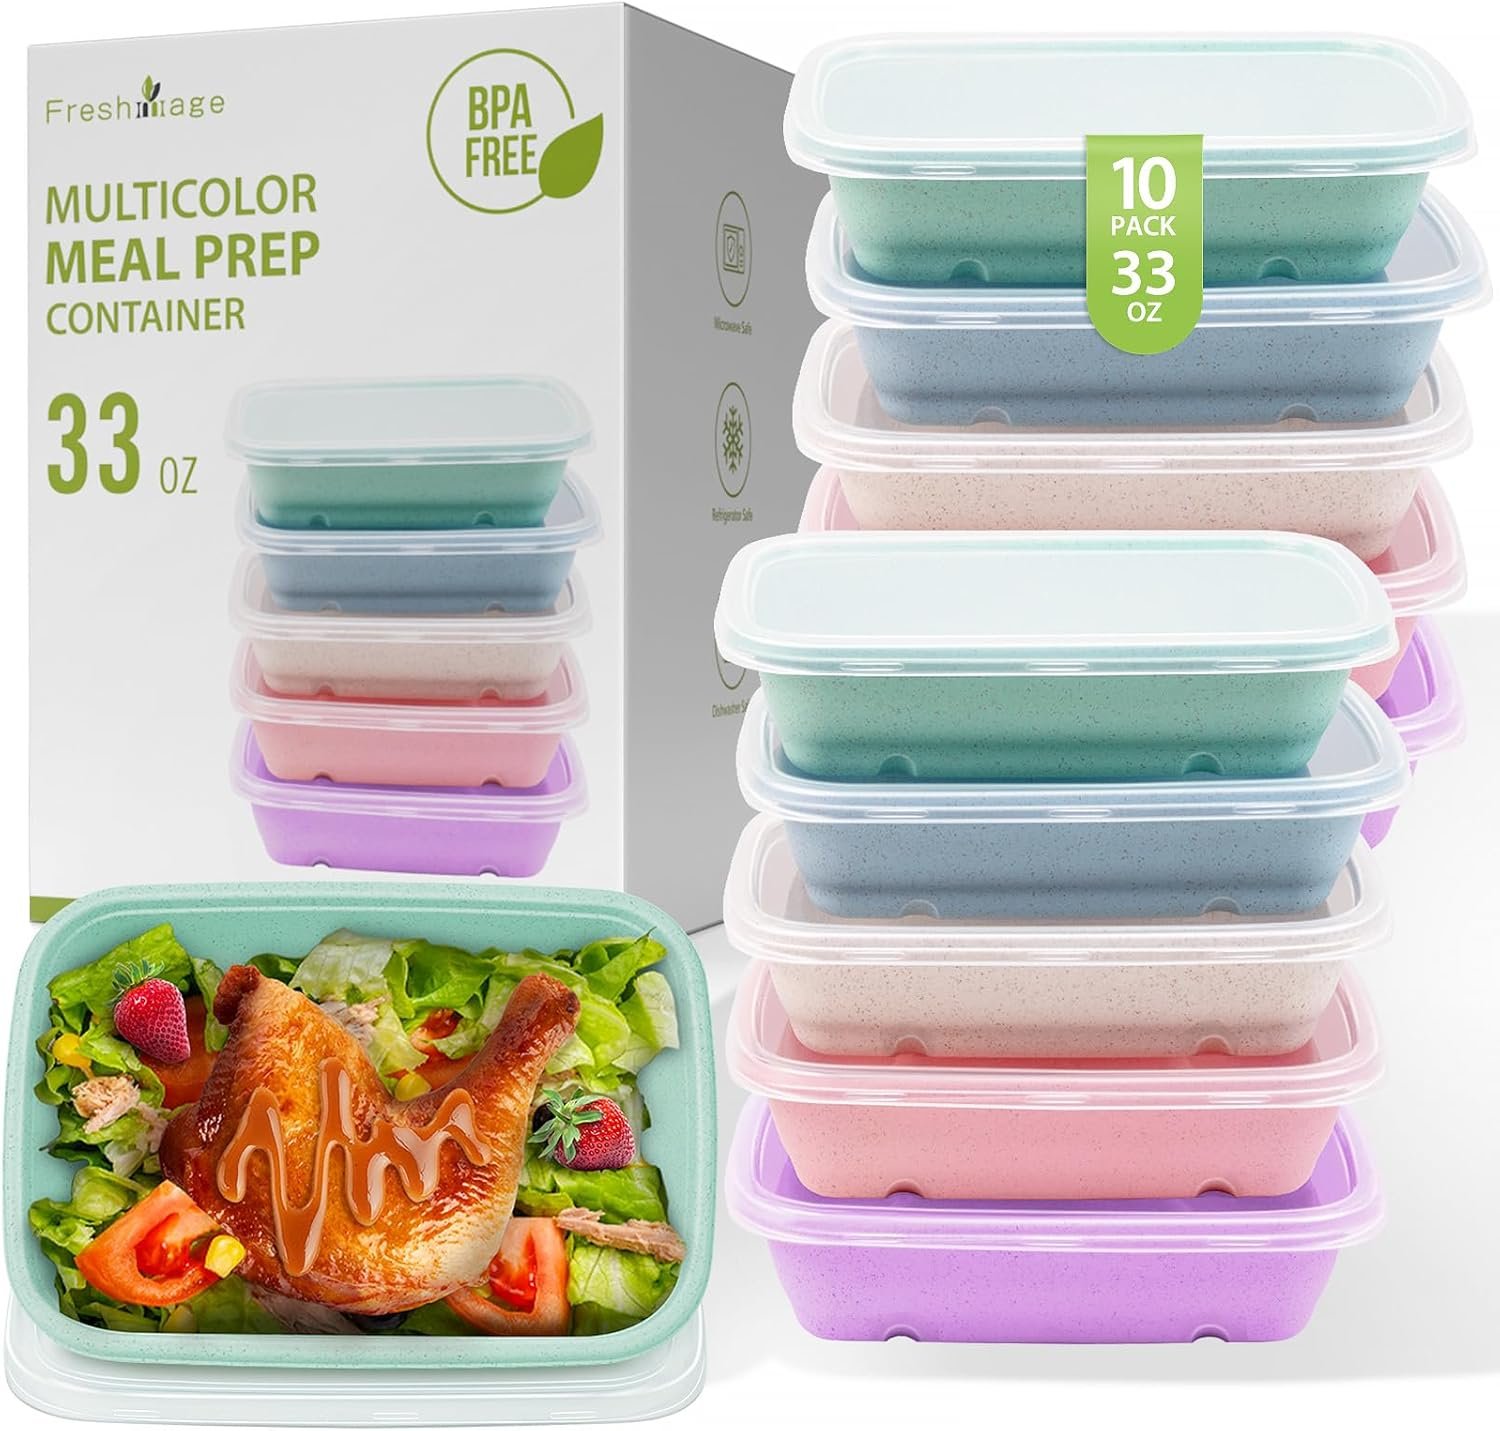 Freshmage Meal Prep Container Review